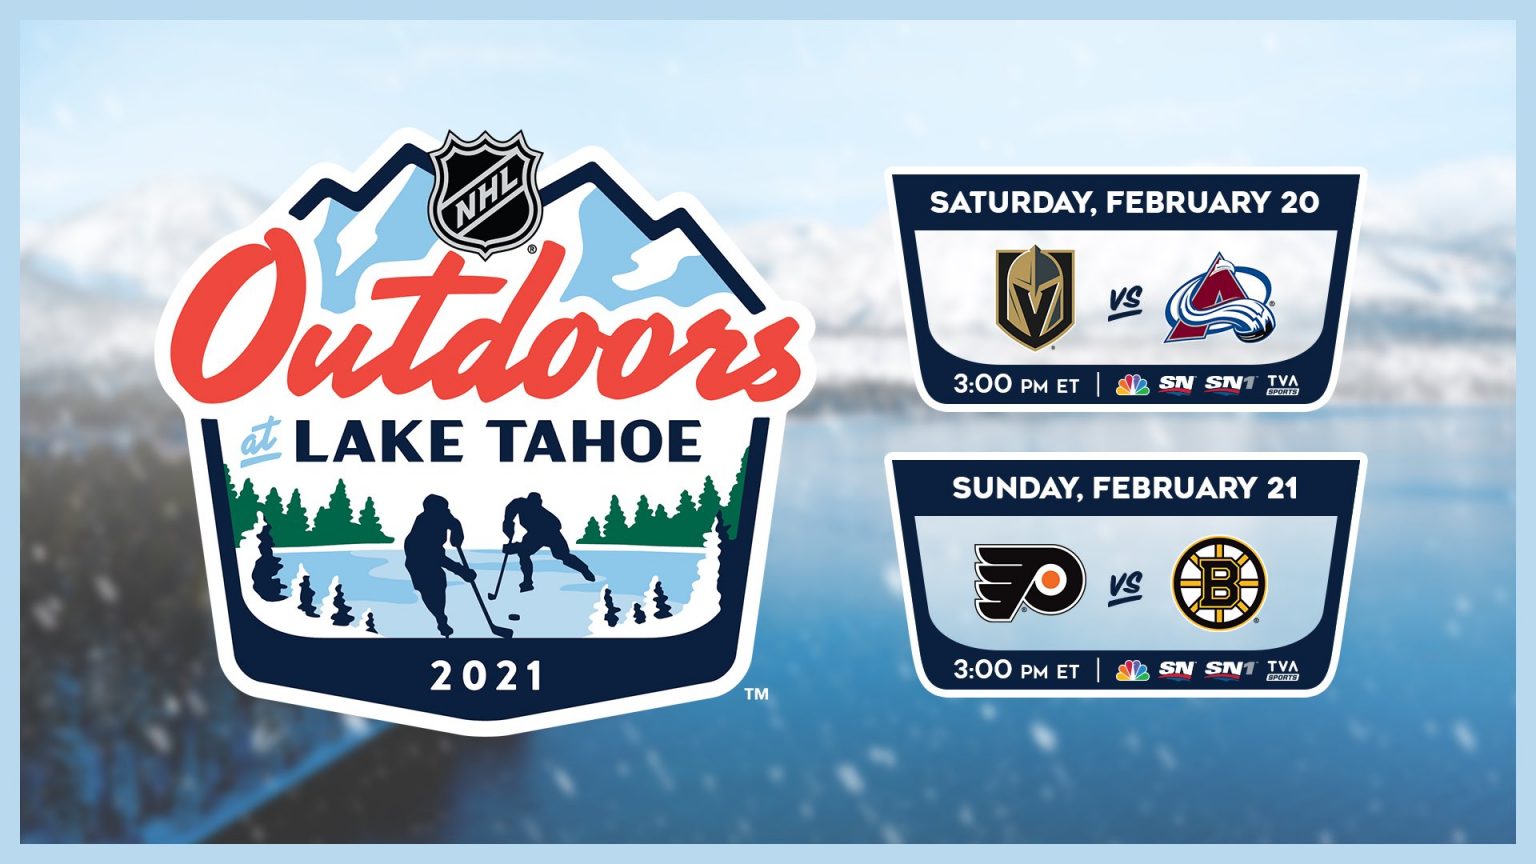 NHL to Play 2 Outdoor Games in Lake Tahoe, NV this Coming February